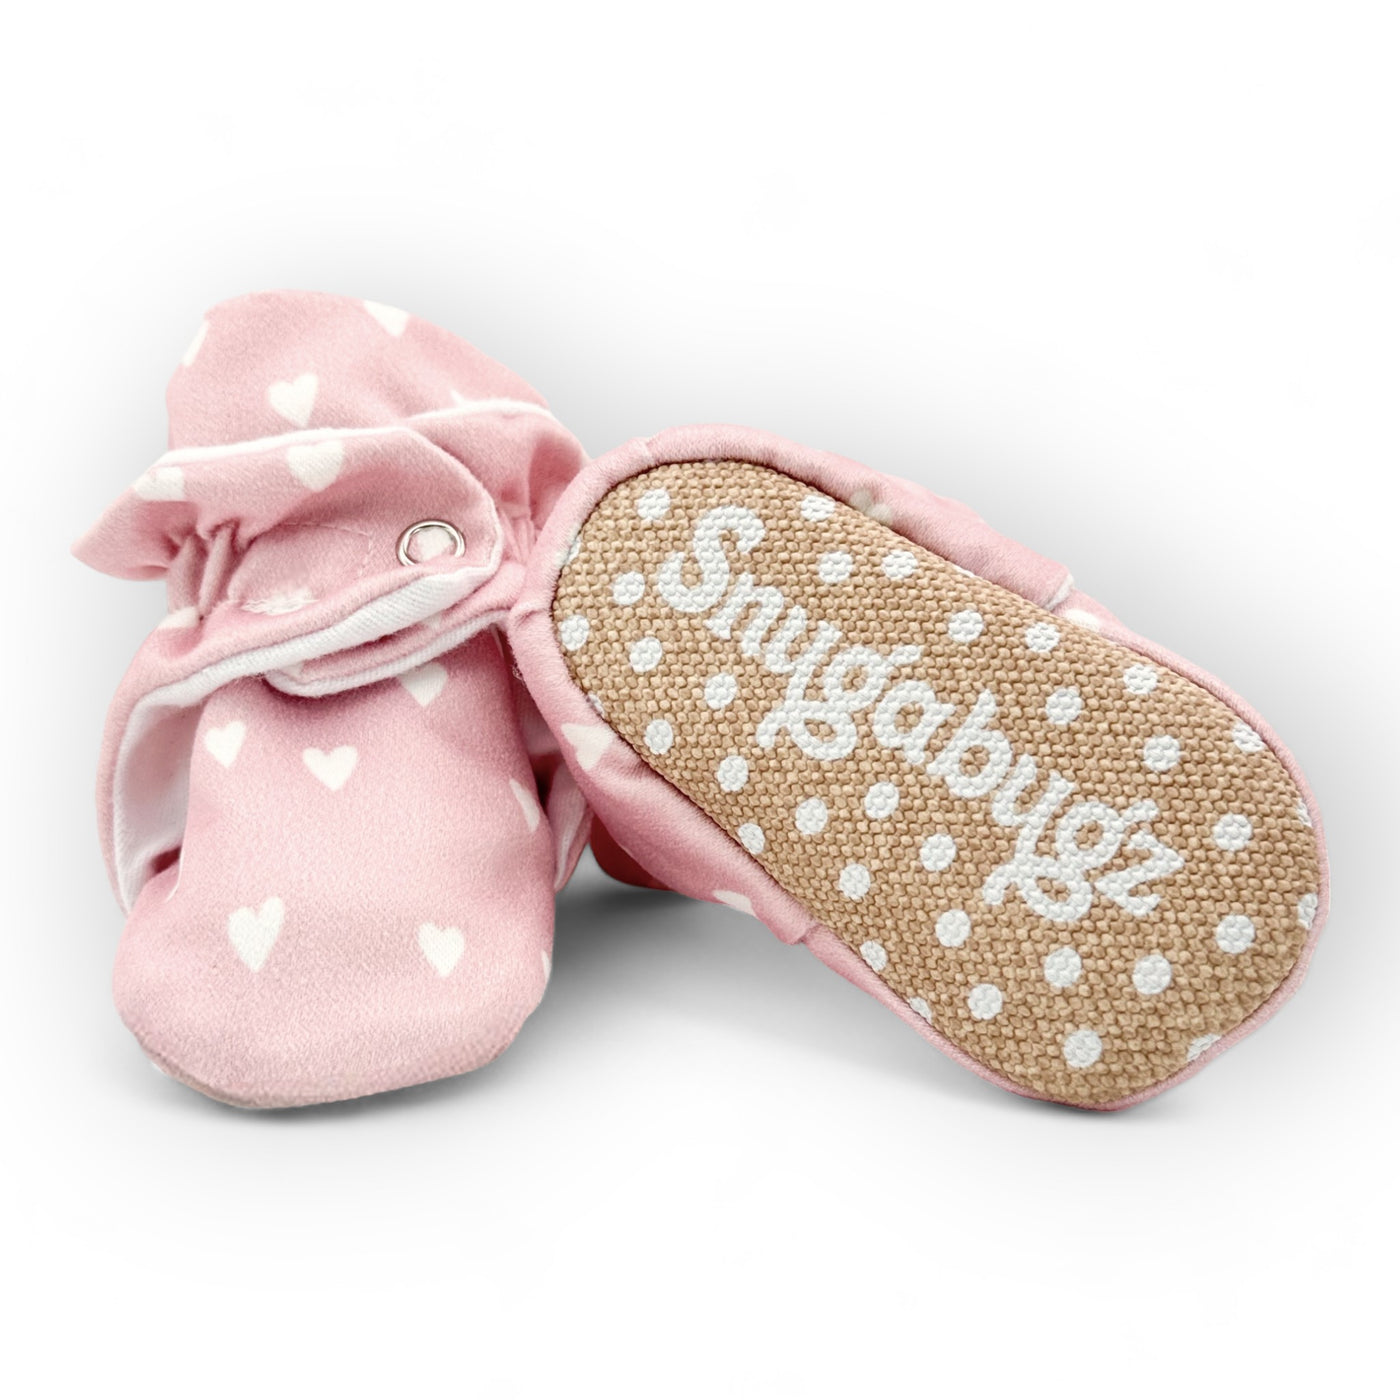 Stay-on baby booties featuring a white hearts print on a pink background, with non-slip soles and adjustable three snap closure. Made from organic cotton.